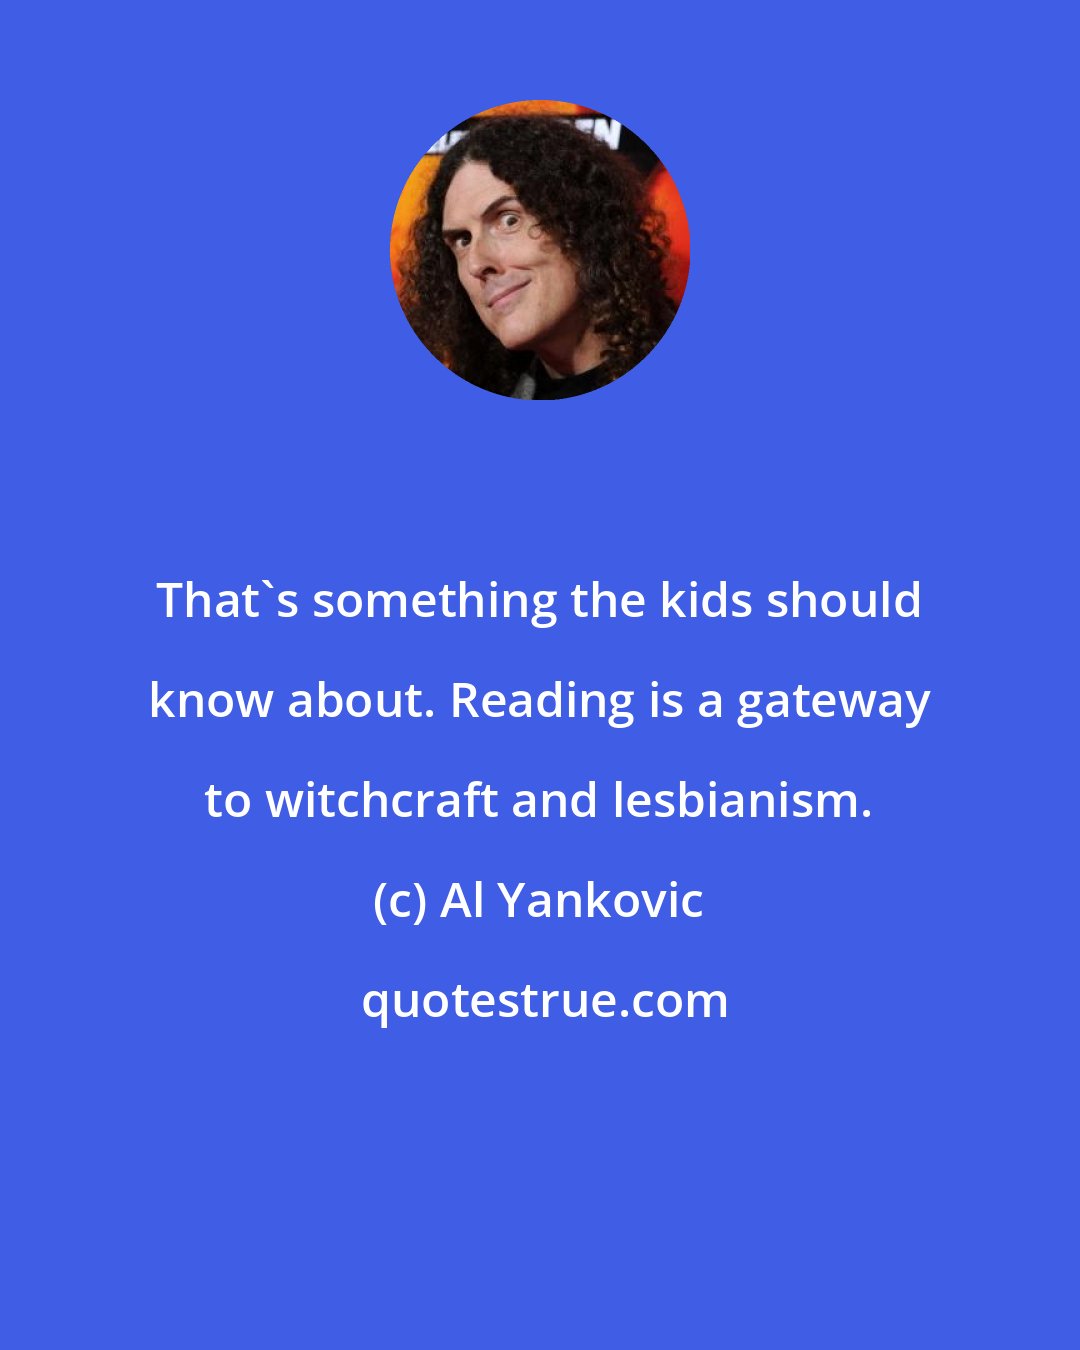 Al Yankovic: That's something the kids should know about. Reading is a gateway to witchcraft and lesbianism.